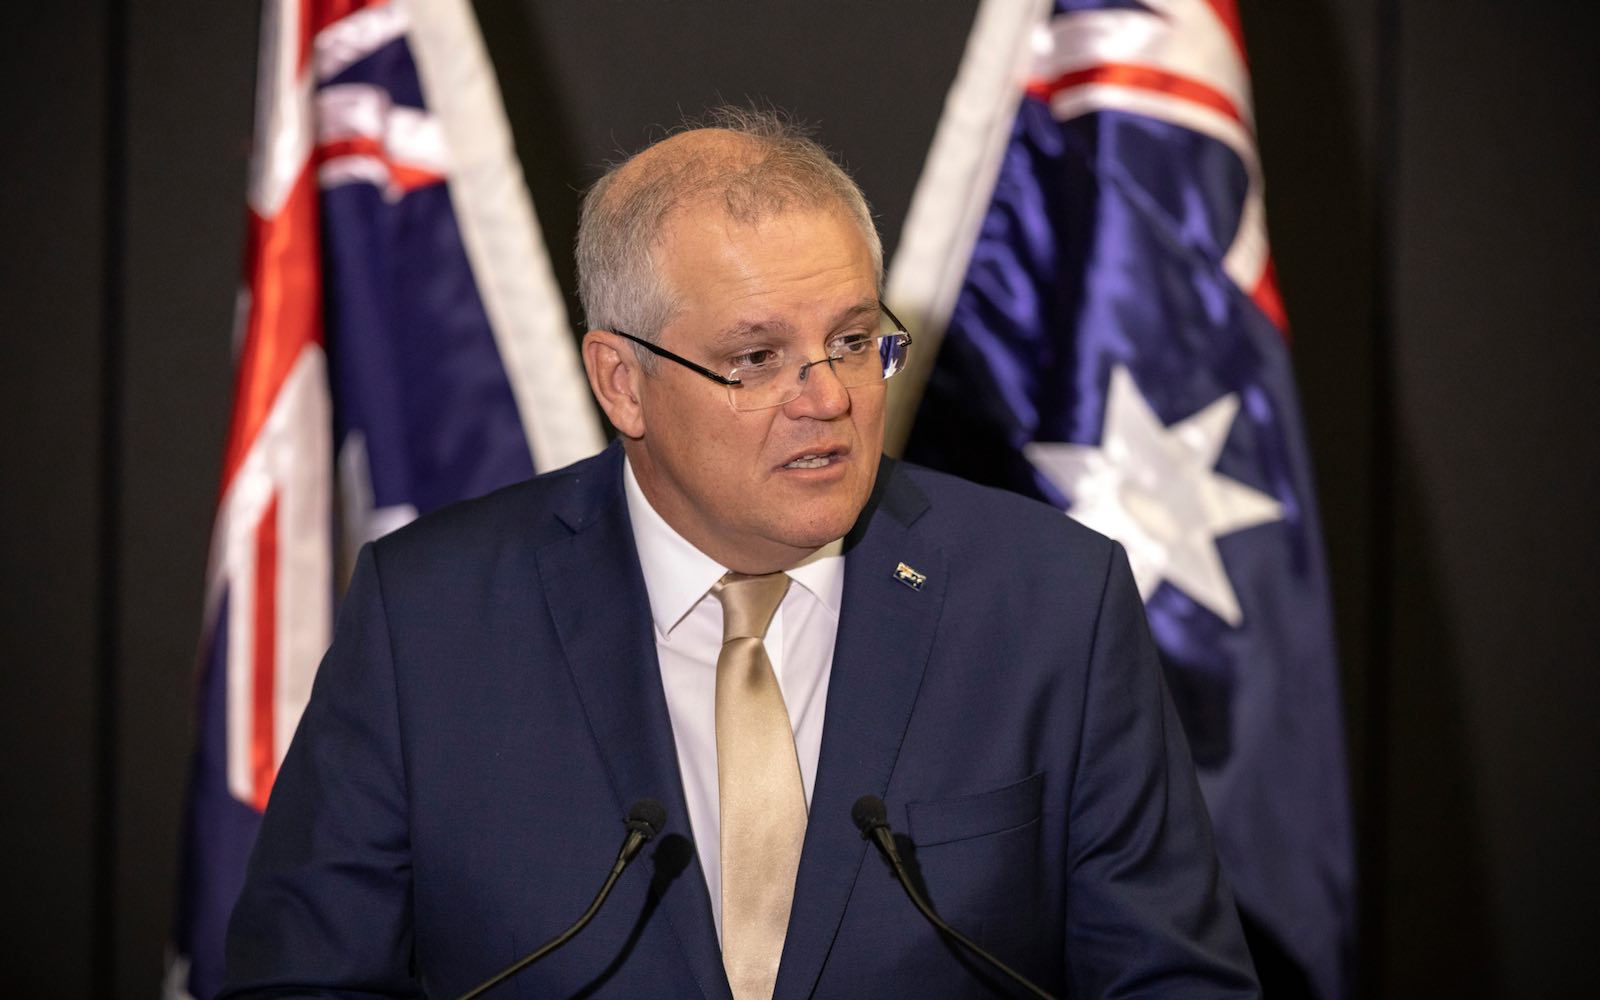 Prime Minister Scott Morrison at the launch of the 2020 Defence Strategic Update at the Australian Defence Force Academy in Canberra, 1 July 2020 (Department of Defence)